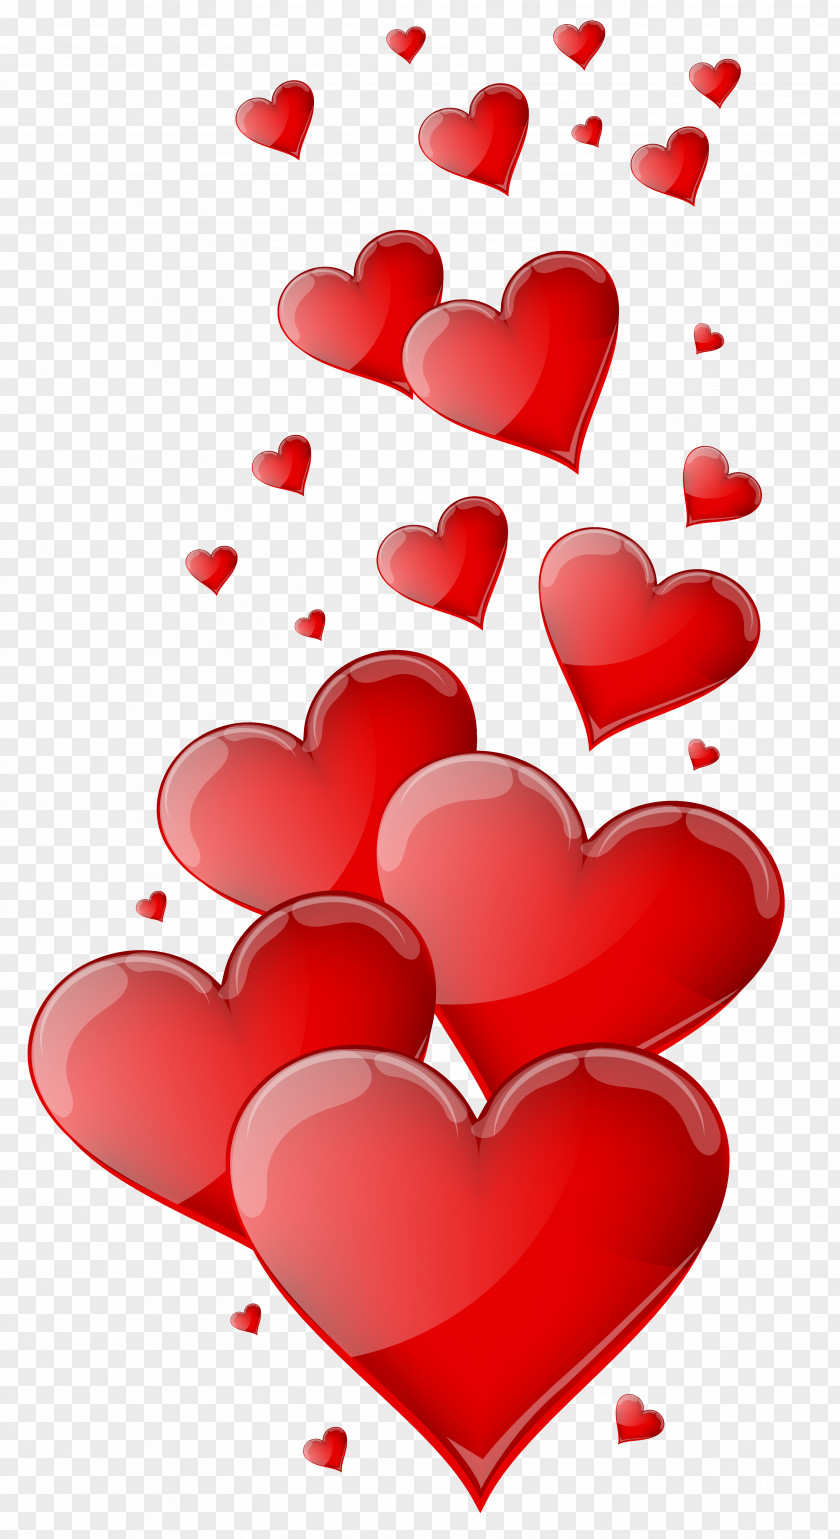 Red Hearts Clipart Image Heart Love Clip Art PNG